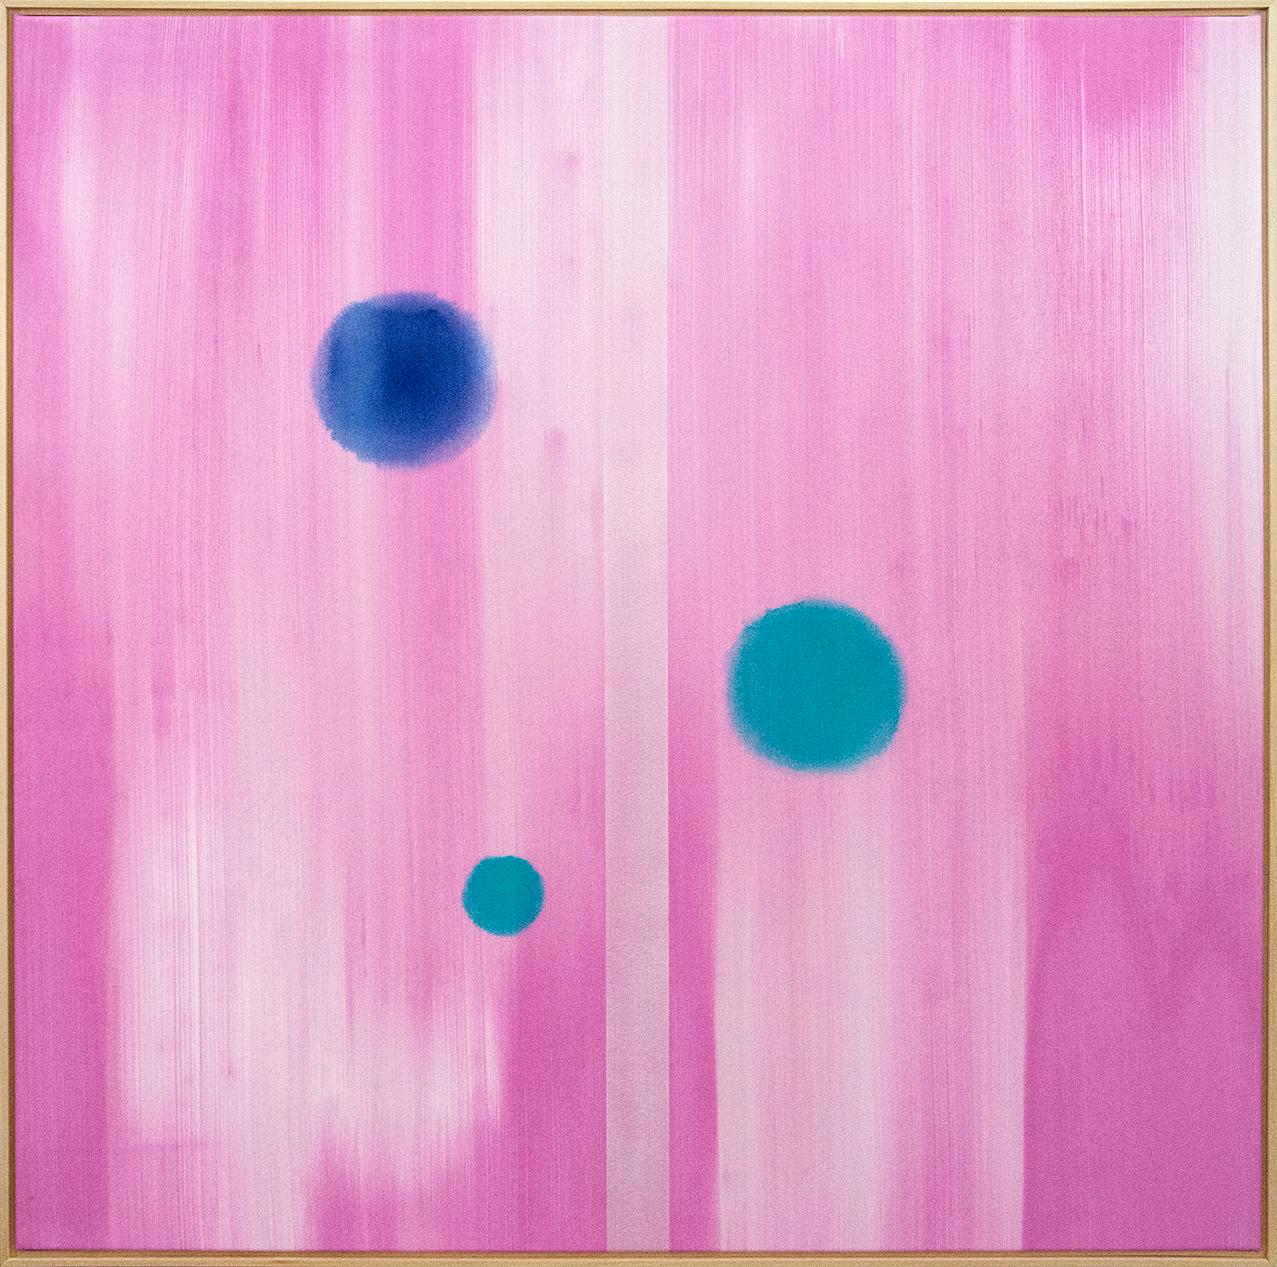 In Other Worlds - pink, navy blue and turquoise abstraction, acrylic on canvas - Painting by Milly Ristvedt